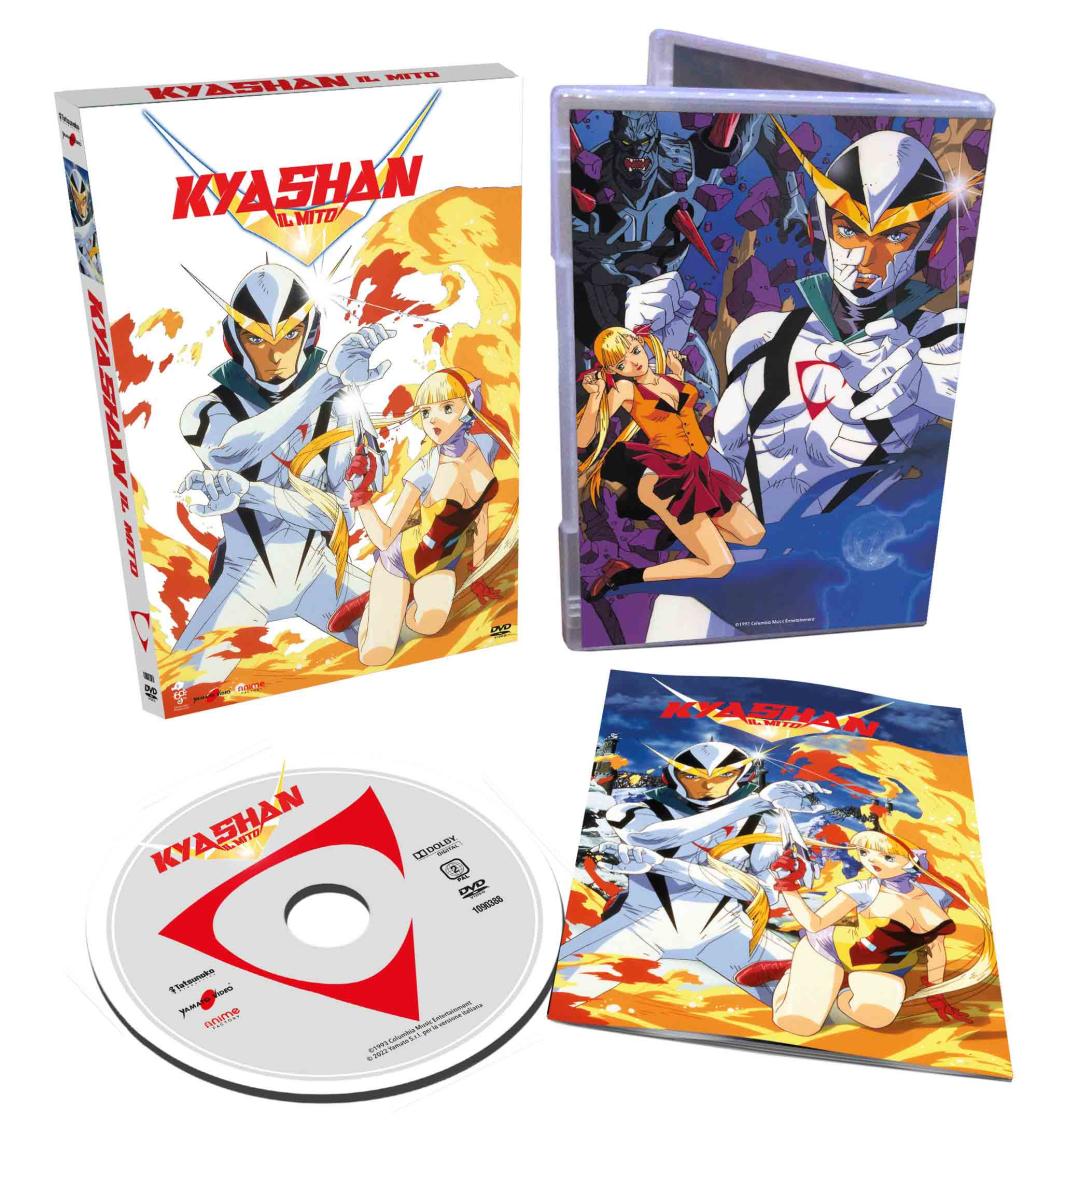 Tatsunoko Super Heroes - OAV Collection - Limited Edition 5 DVD + Booklet (DVD) Image 16